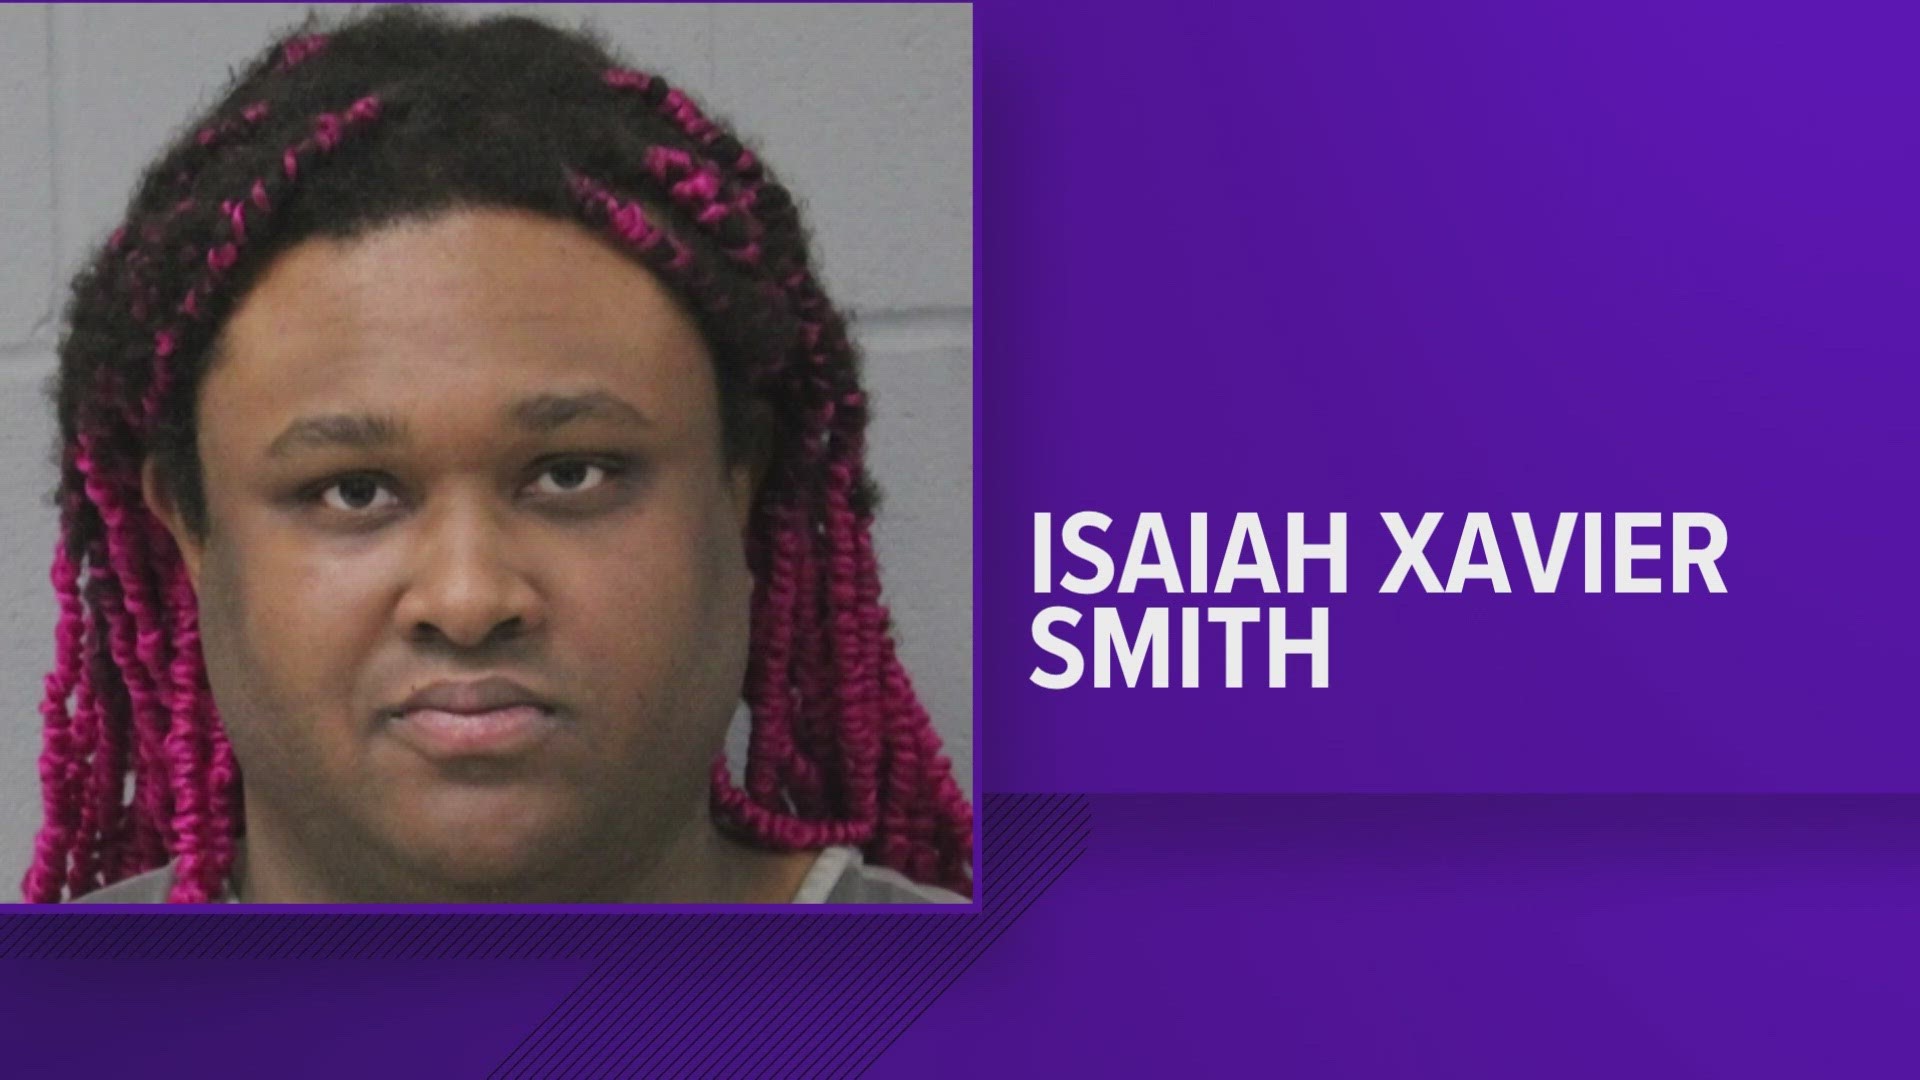 Isaiah Xavier Smith is already in the Travis County Jail on an indecency with child charge stemming from an alleged incident at Akins High School in Austin.